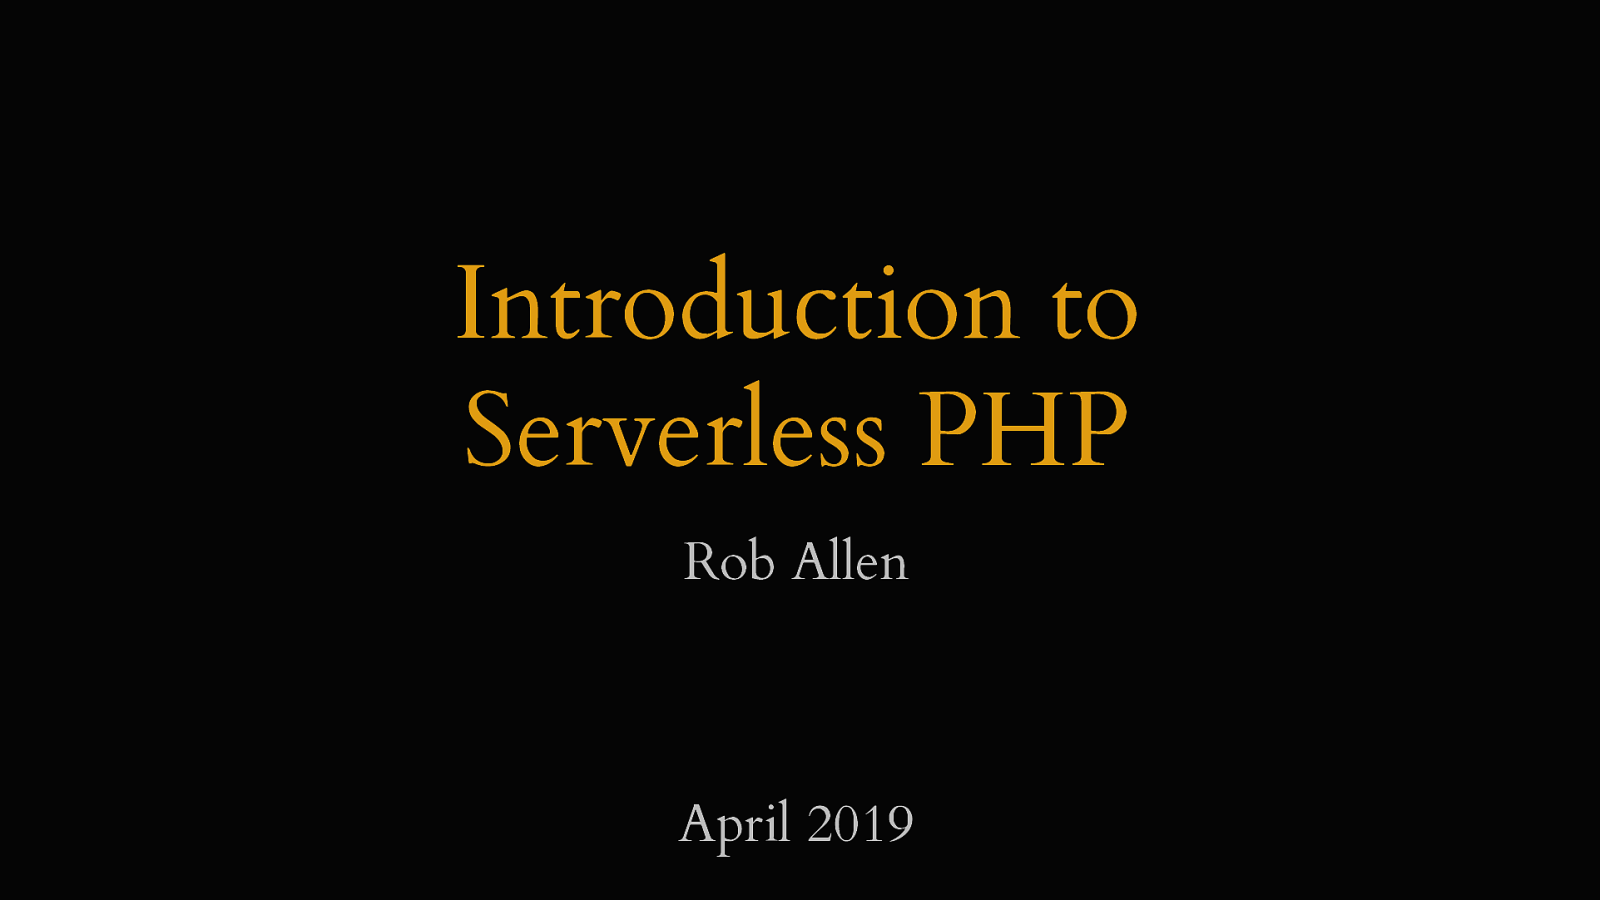 Introduction to Serverless PHP